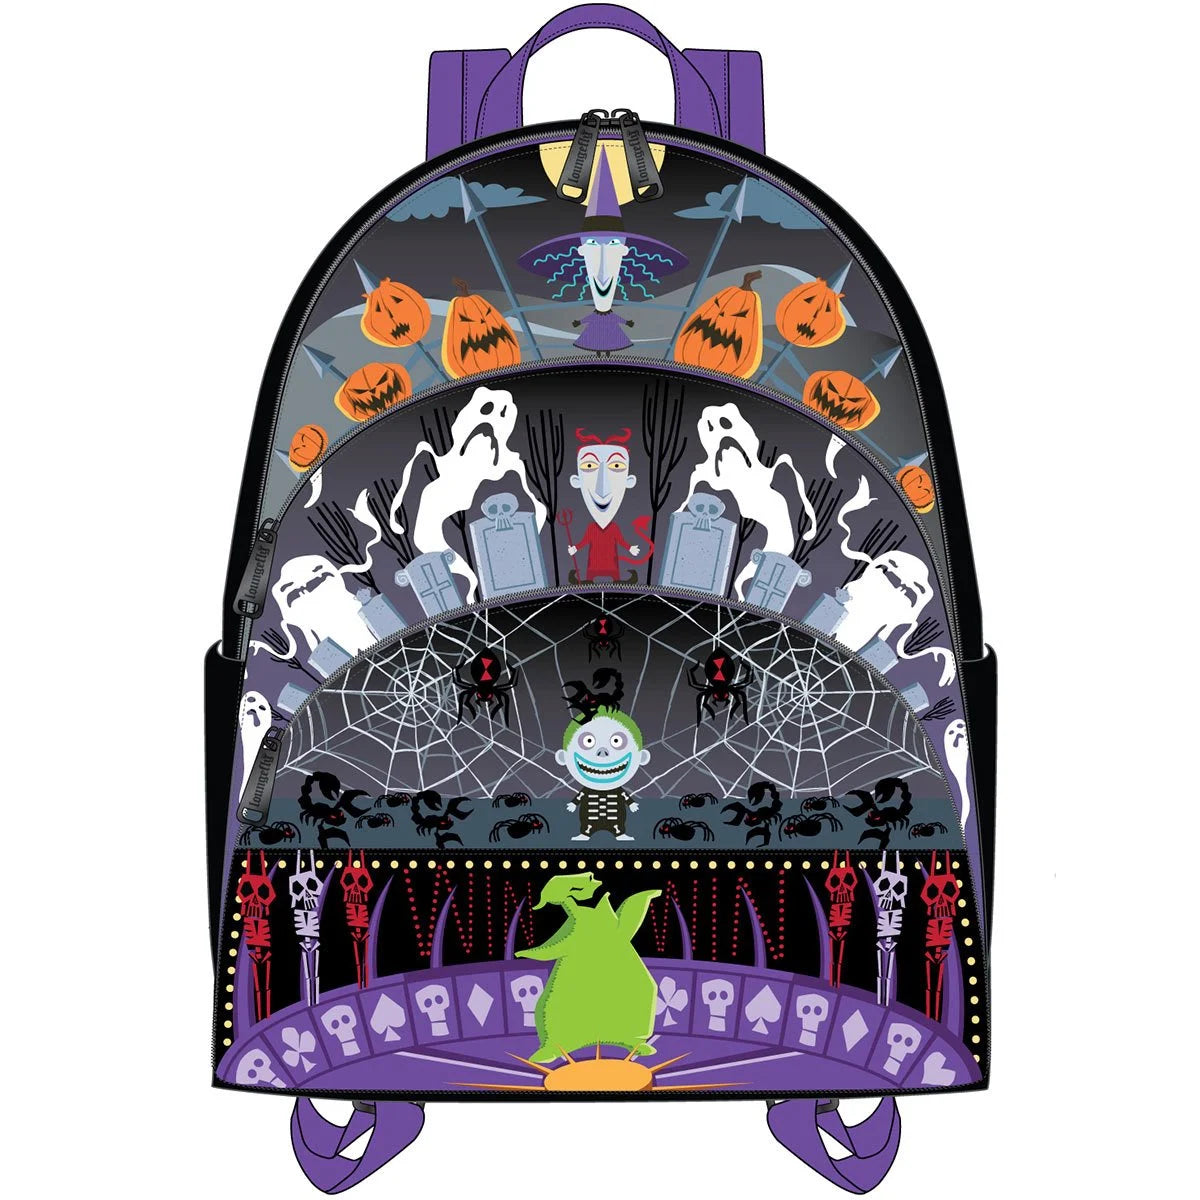 The Nightmare Before Christmas Triple Pocket Glow-in-the-Dark Mini-Backpack by Loungefly